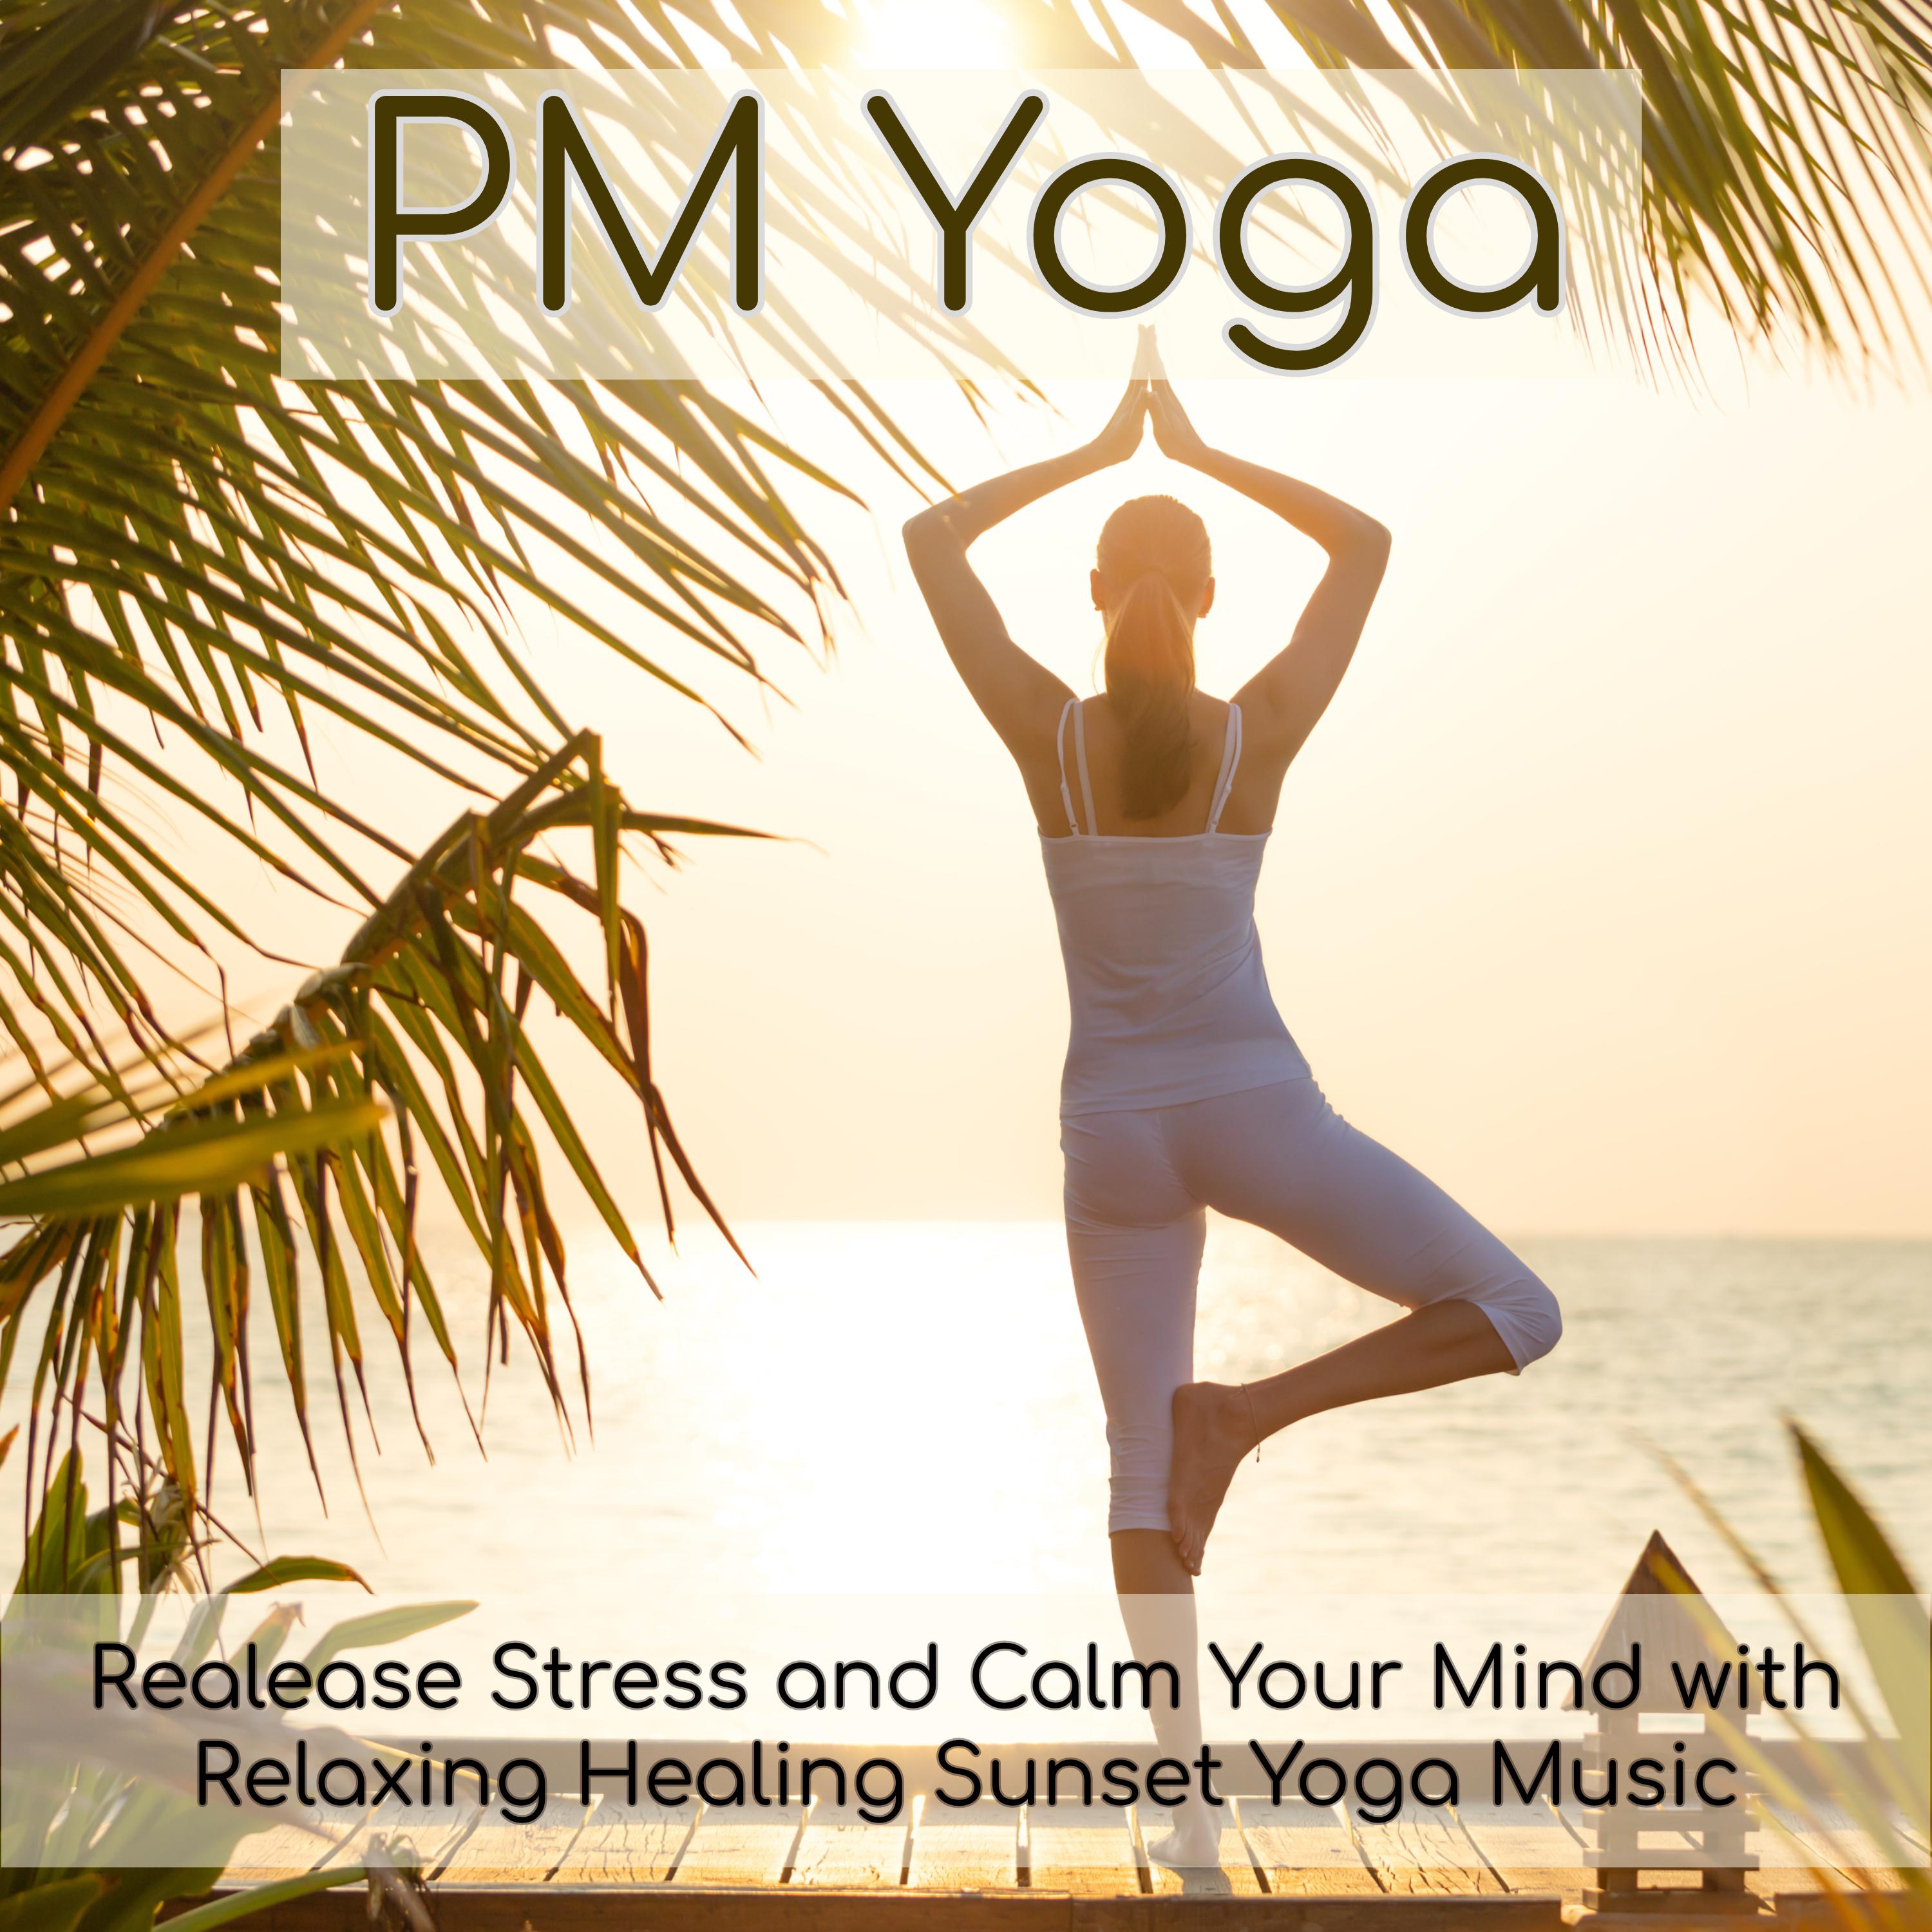 PM Yoga – Realease Stress and Calm Your Mind with Relaxing Healing Sunset Yoga Music